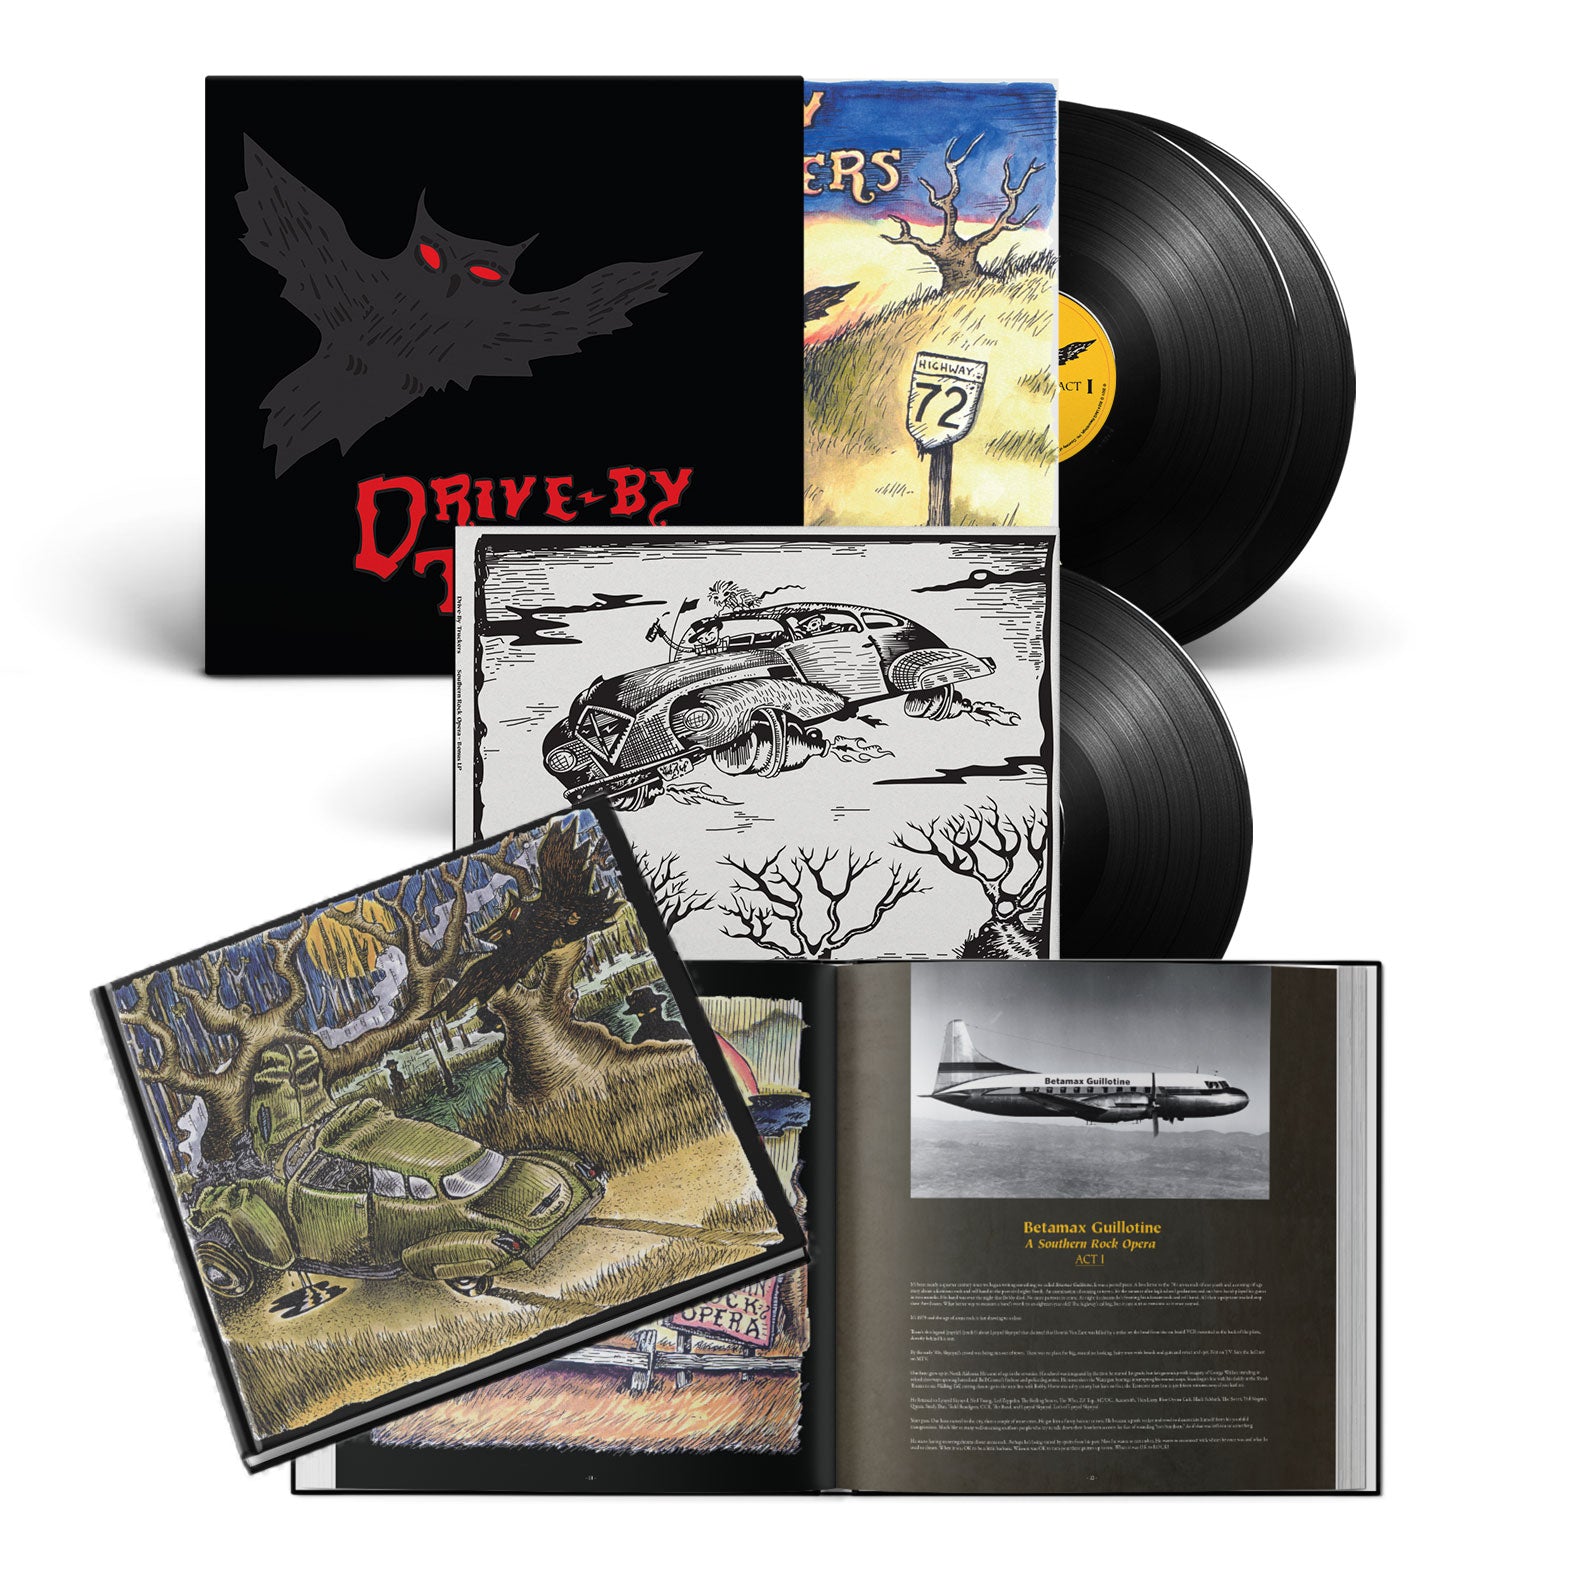 Drive-By Truckers - Southern Rock Opera - Deluxe Edition [Vinyl]